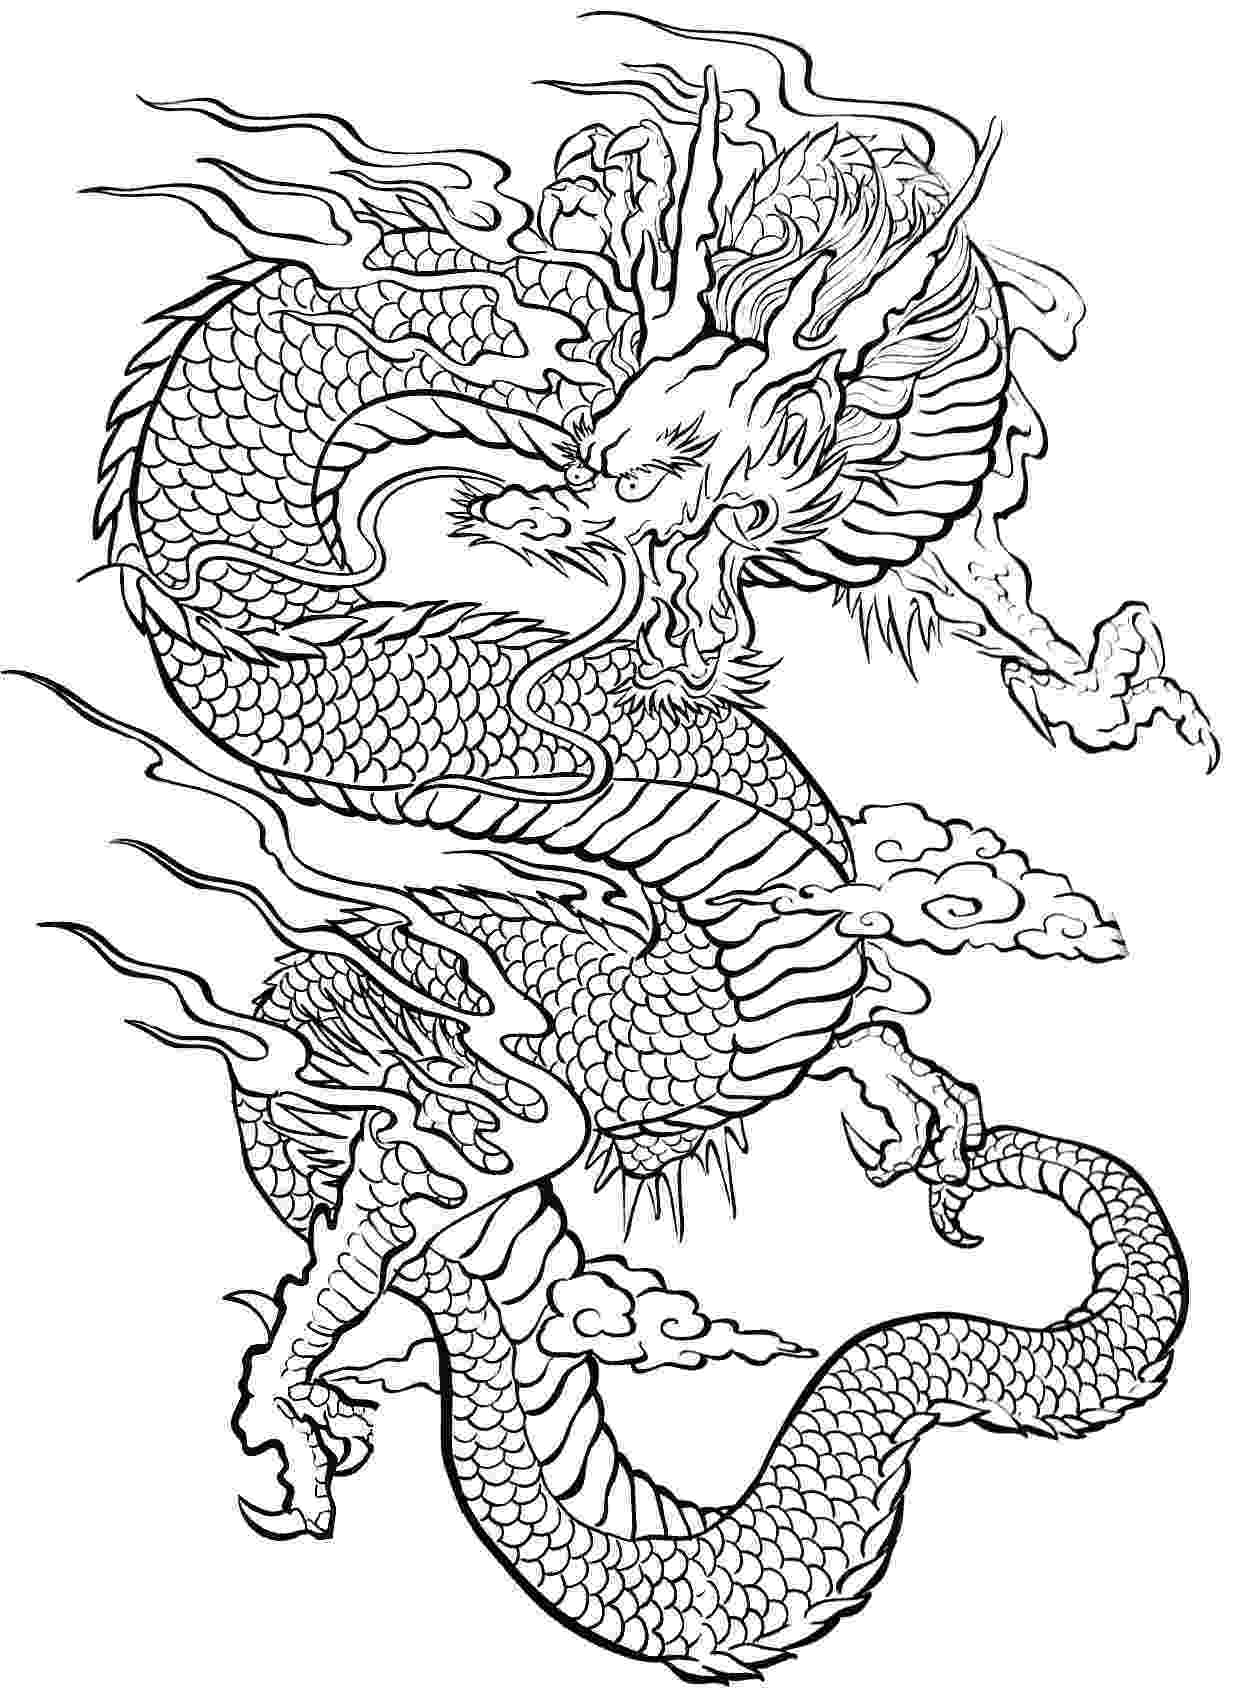 tattoo coloring page items similar to coloring book page tattoo rose digital tattoo page coloring 